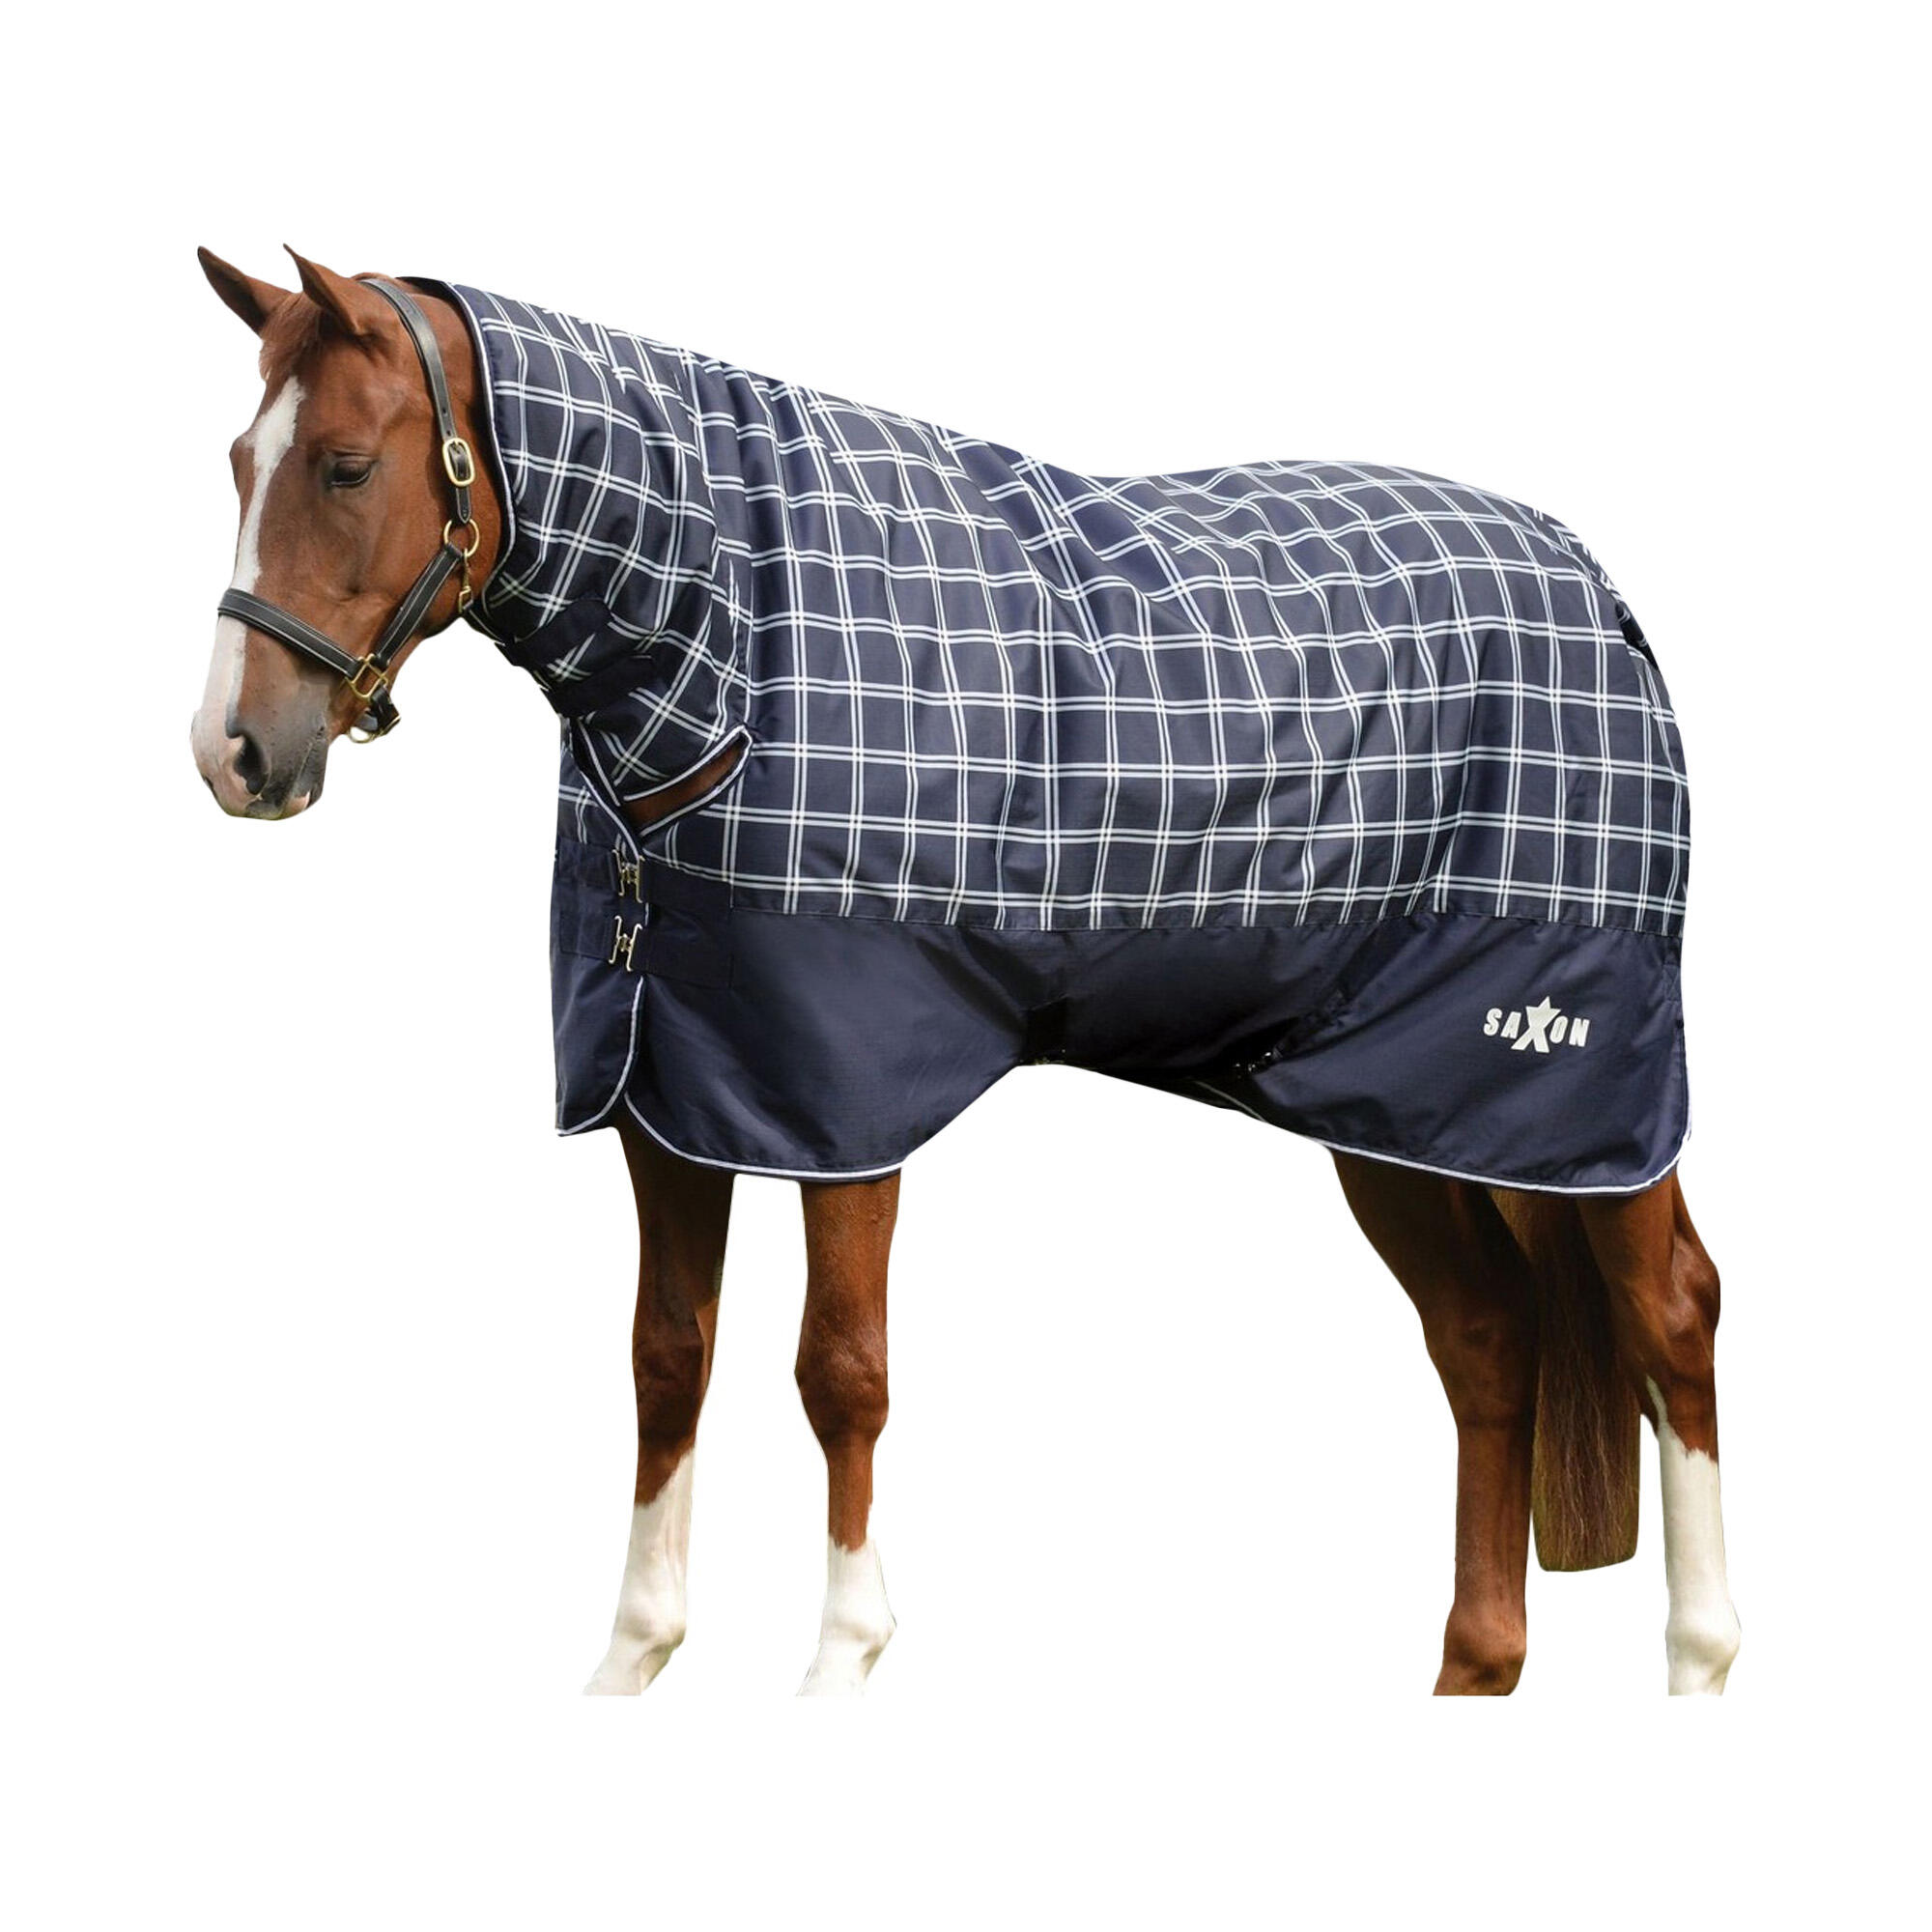 SAXON Defiant Combo Neck Plaid Midweight Horse Turnout Rug (Navy)